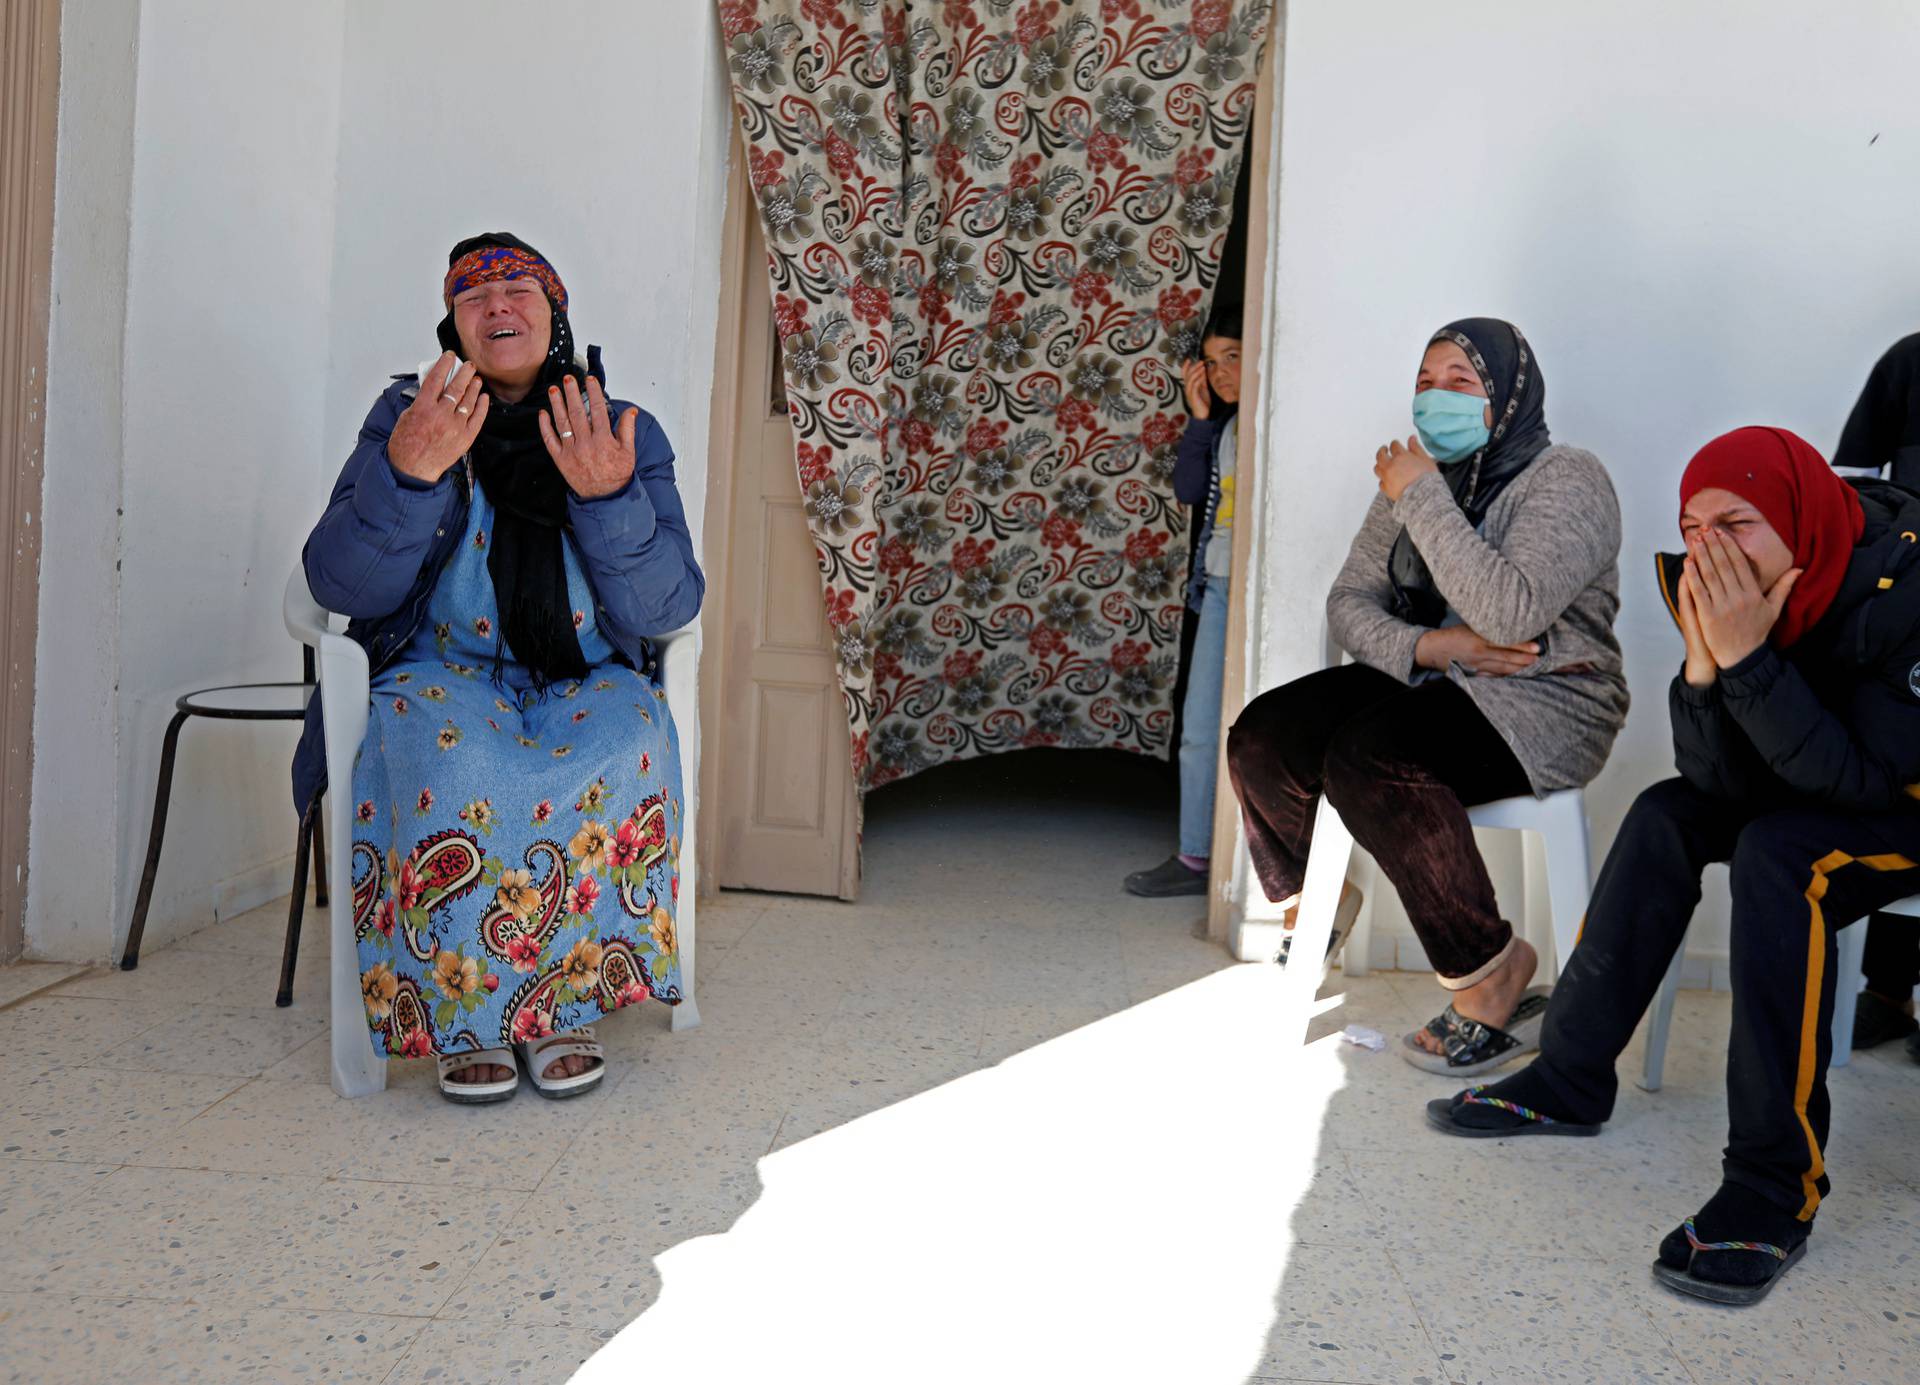 Gamra, the mother of Brahim Aouissaoui, who is suspected of carrying out Thursday's attack in Nice, France, reacts at her home in Thina, a suburb of Sfax, Tunisia